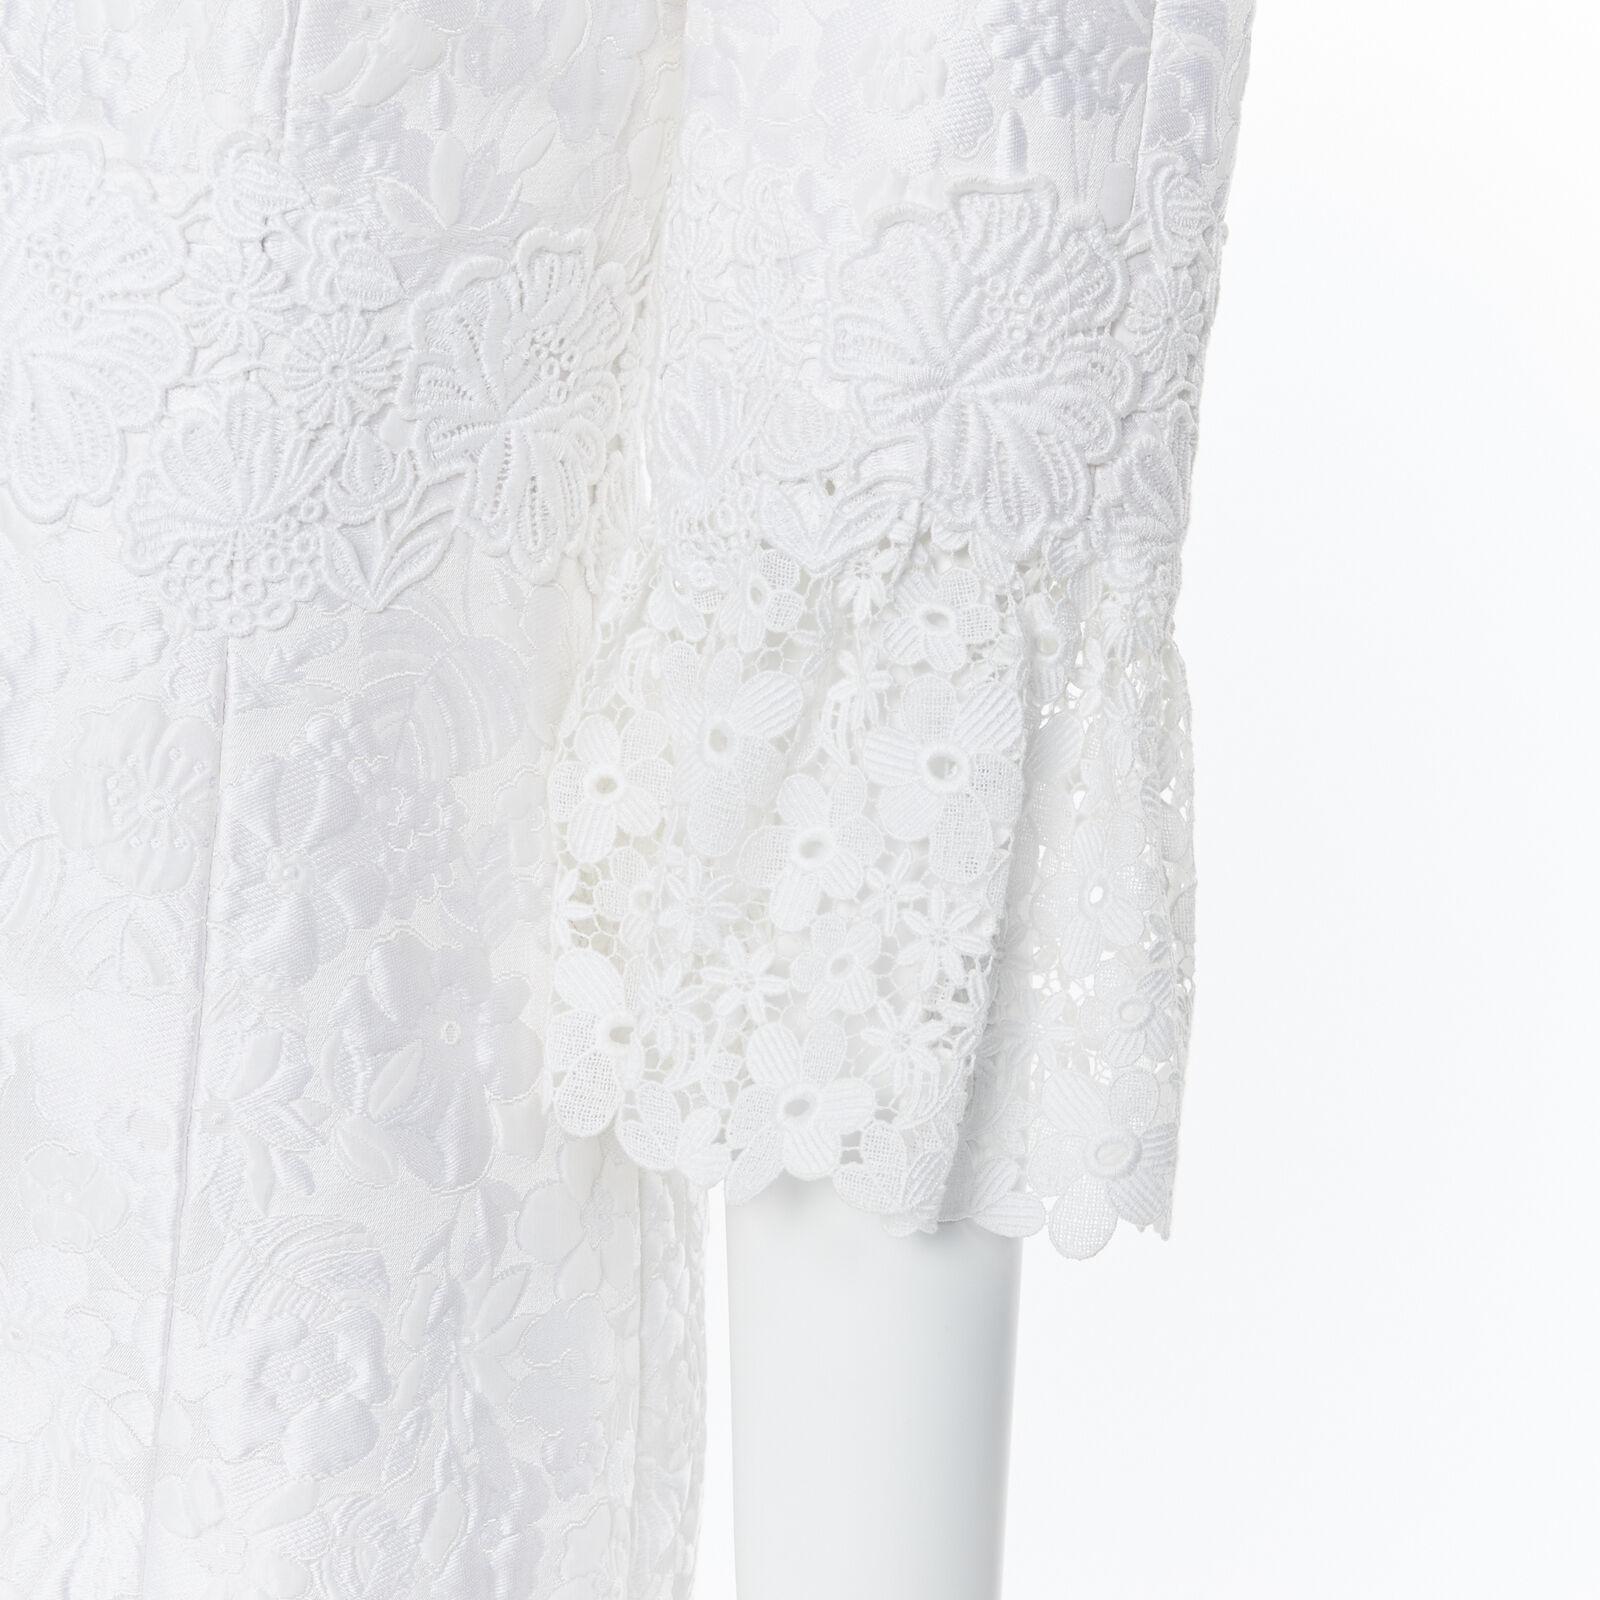 MICHAEL KORS COLLECTION white floral cloque lace trimmed 3/4 sleeve dress US0
Reference: LNKO/A01522
Brand: Michael Kors
Material: Cotton
Color: White
Pattern: Floral
Closure: Zip
Extra Details: Lace trimming at sleeves and along waist.
Made in: